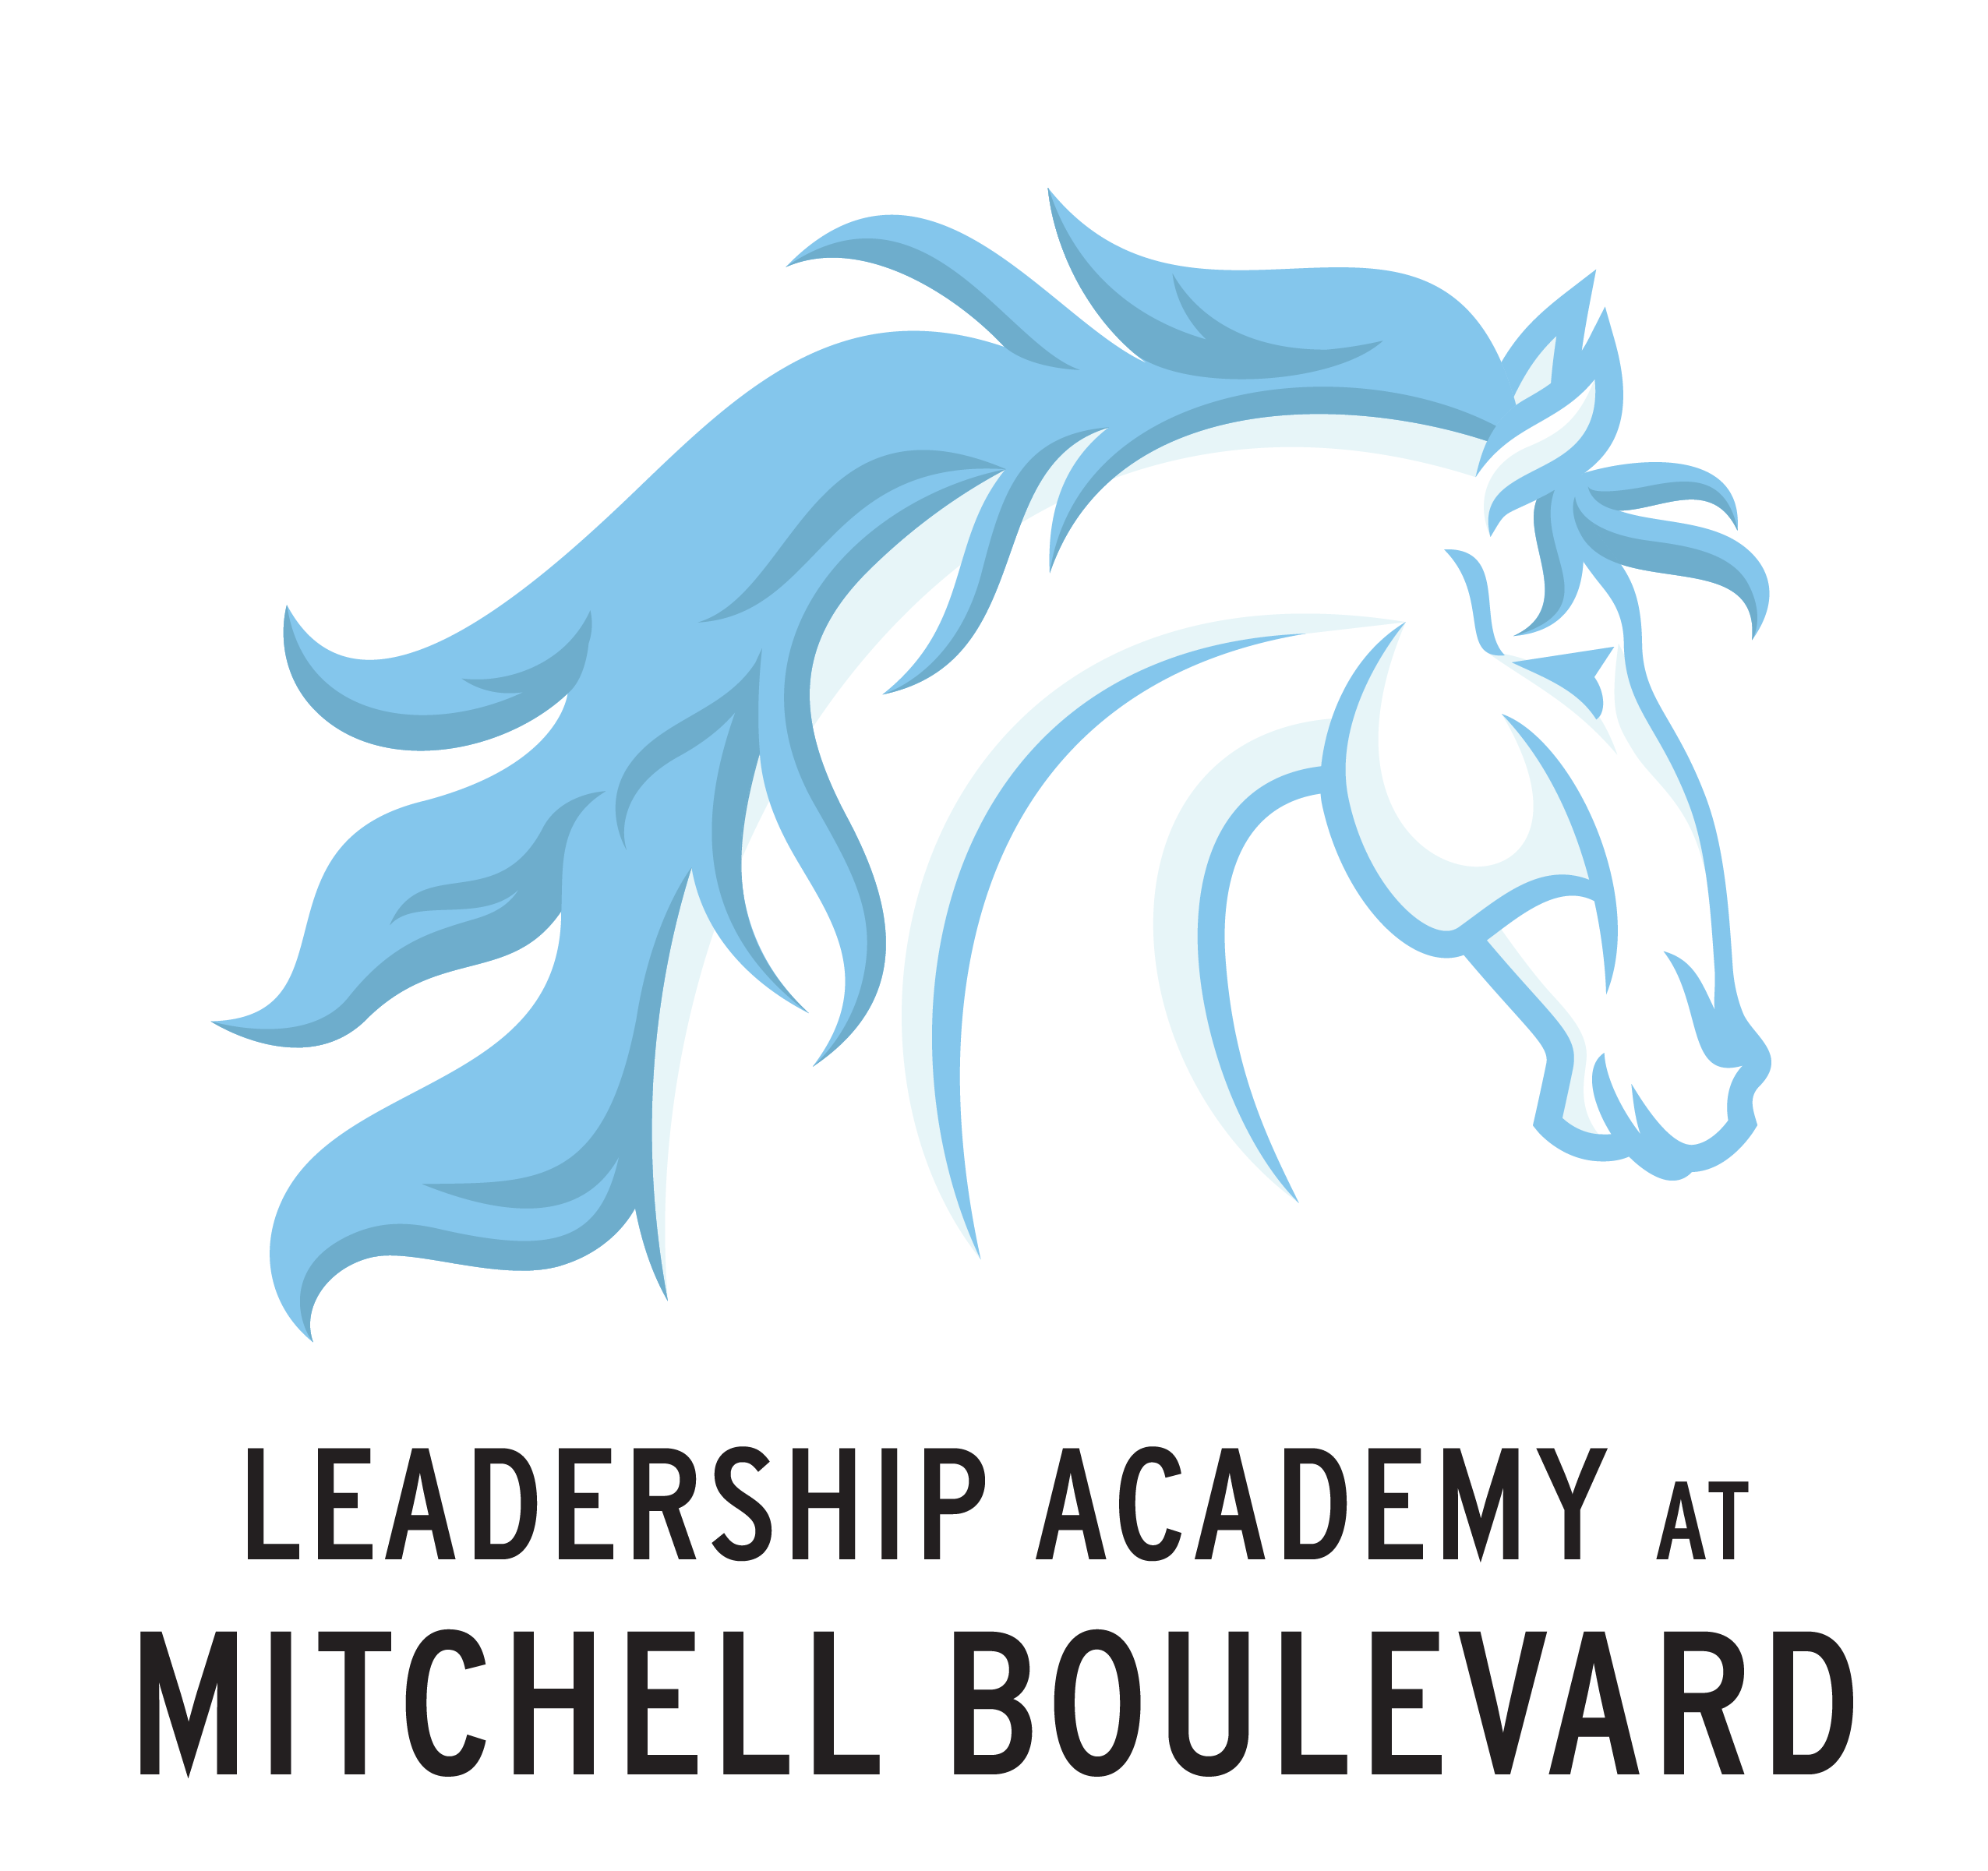 Animated image of mustang serving as logo for Mitchell Blvd.